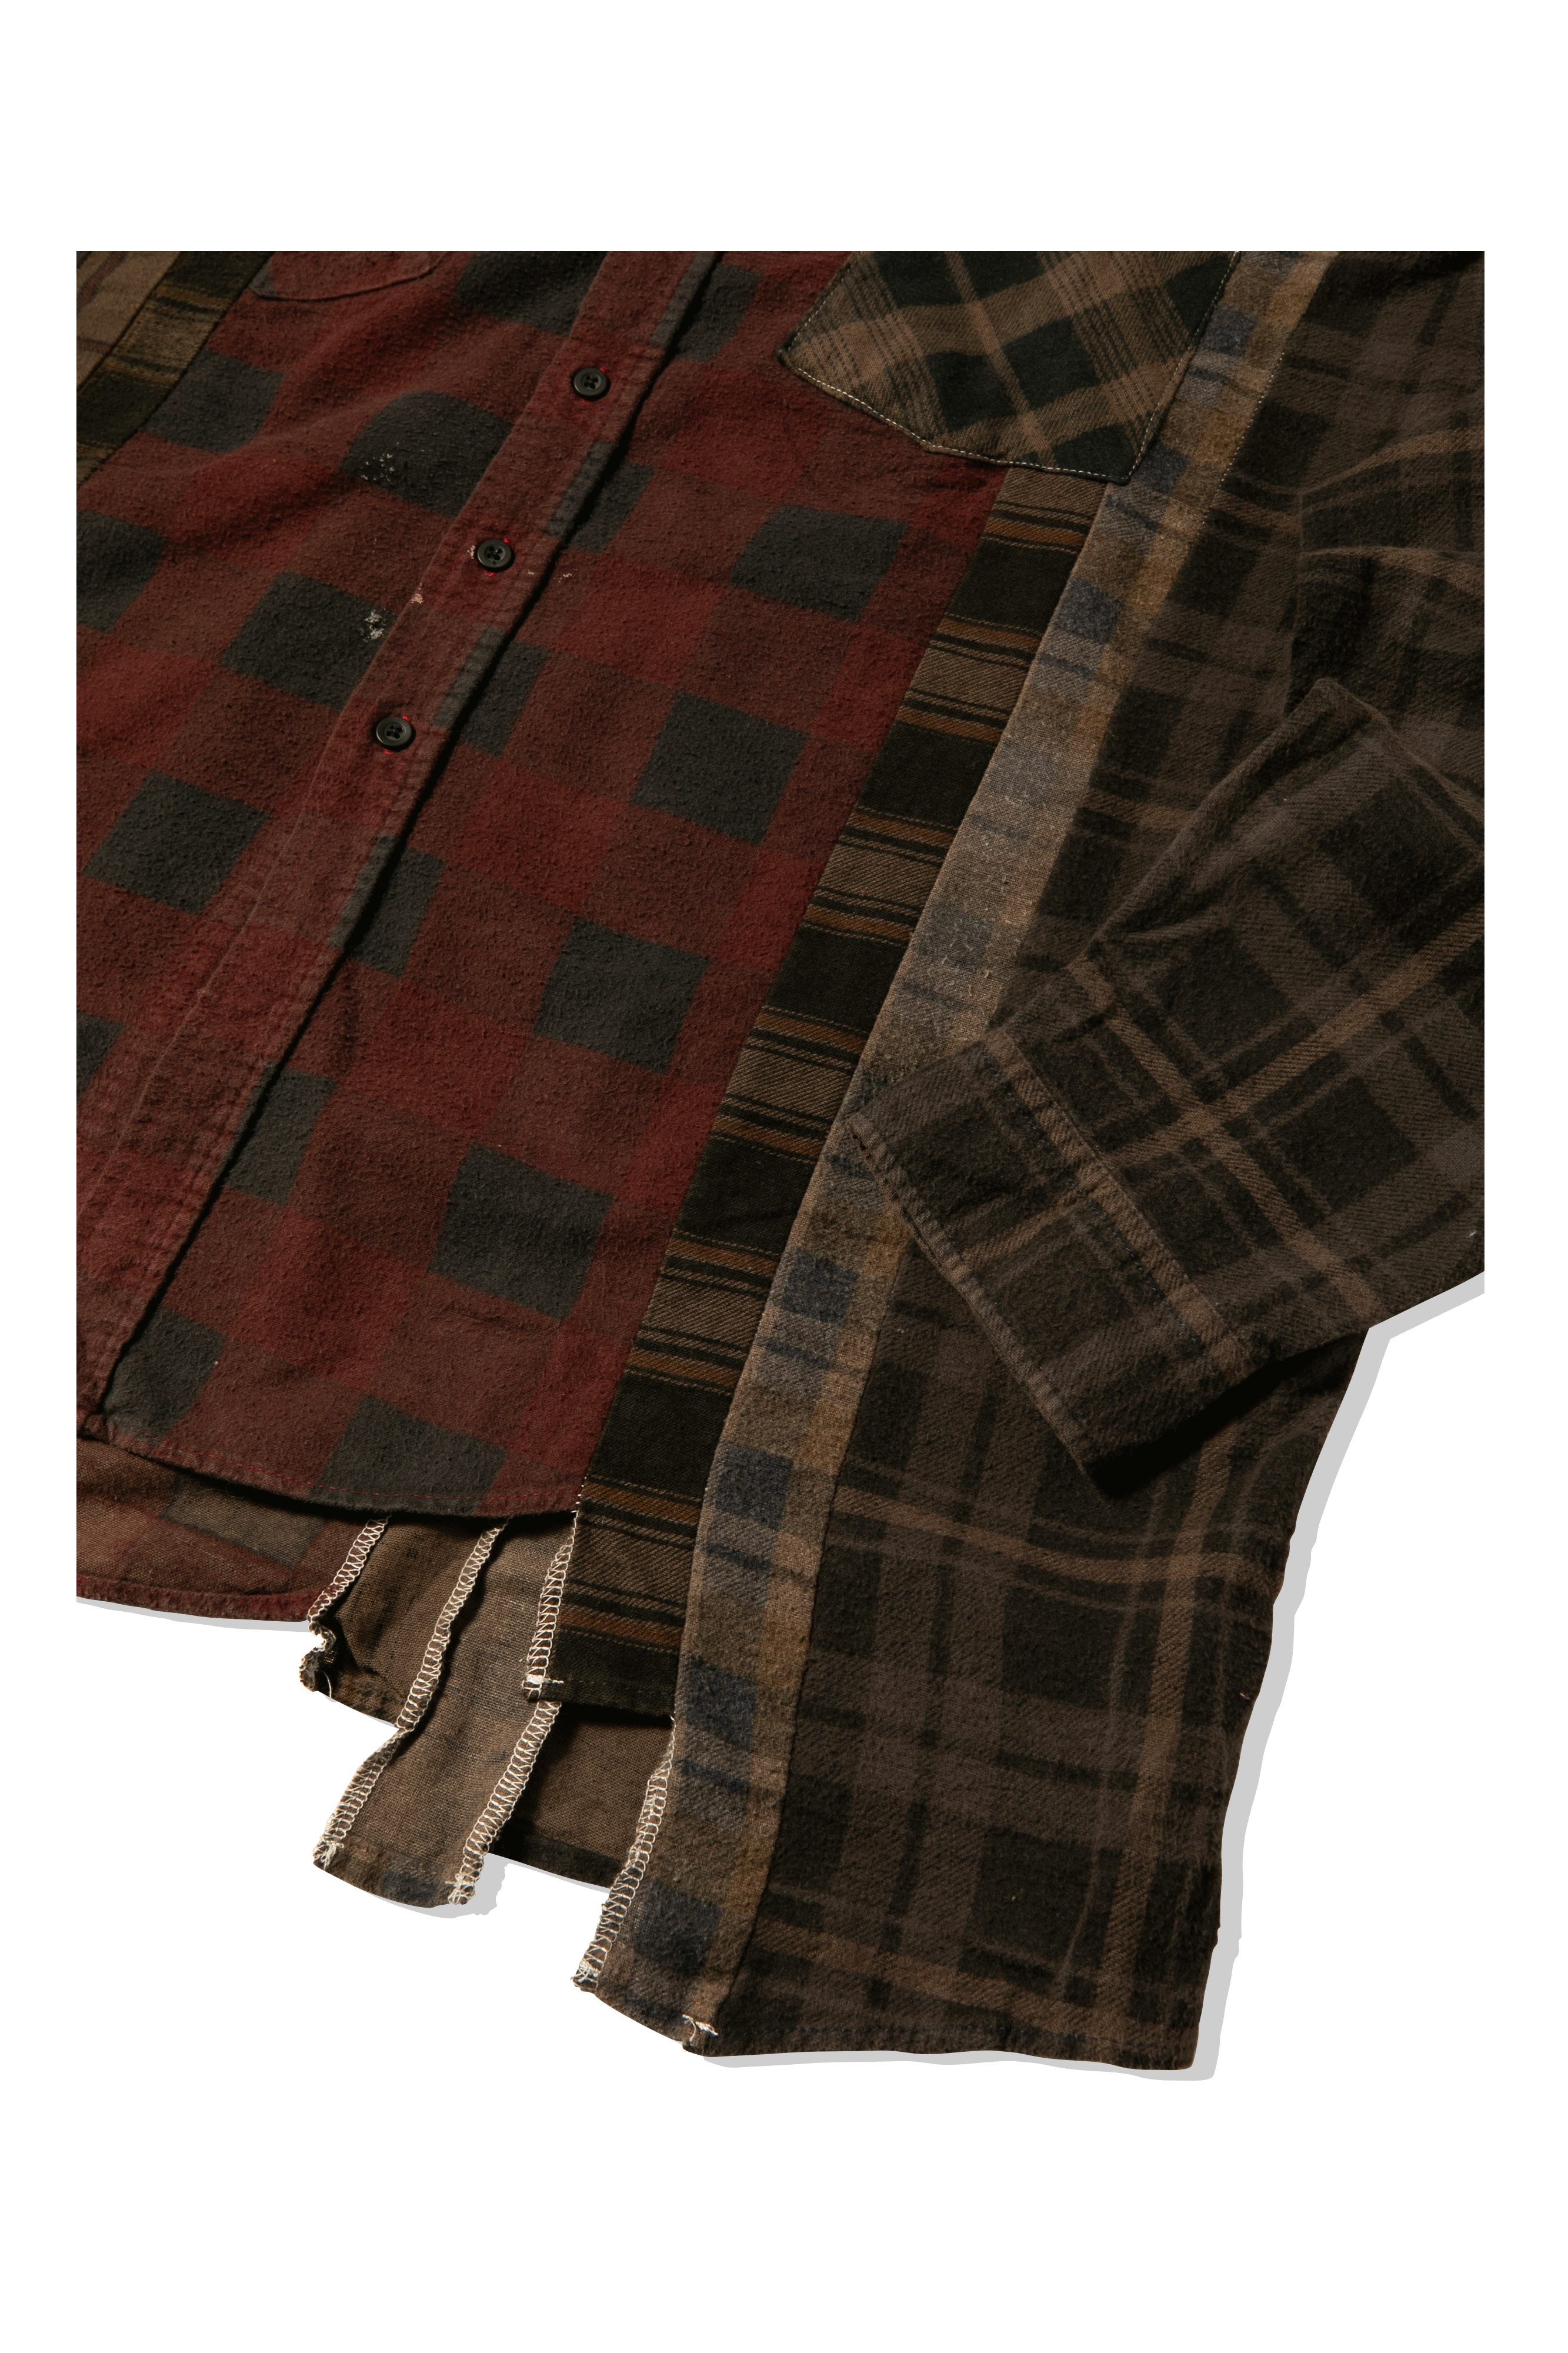 7 Cuts Wide Over Dye Flannel Shirt